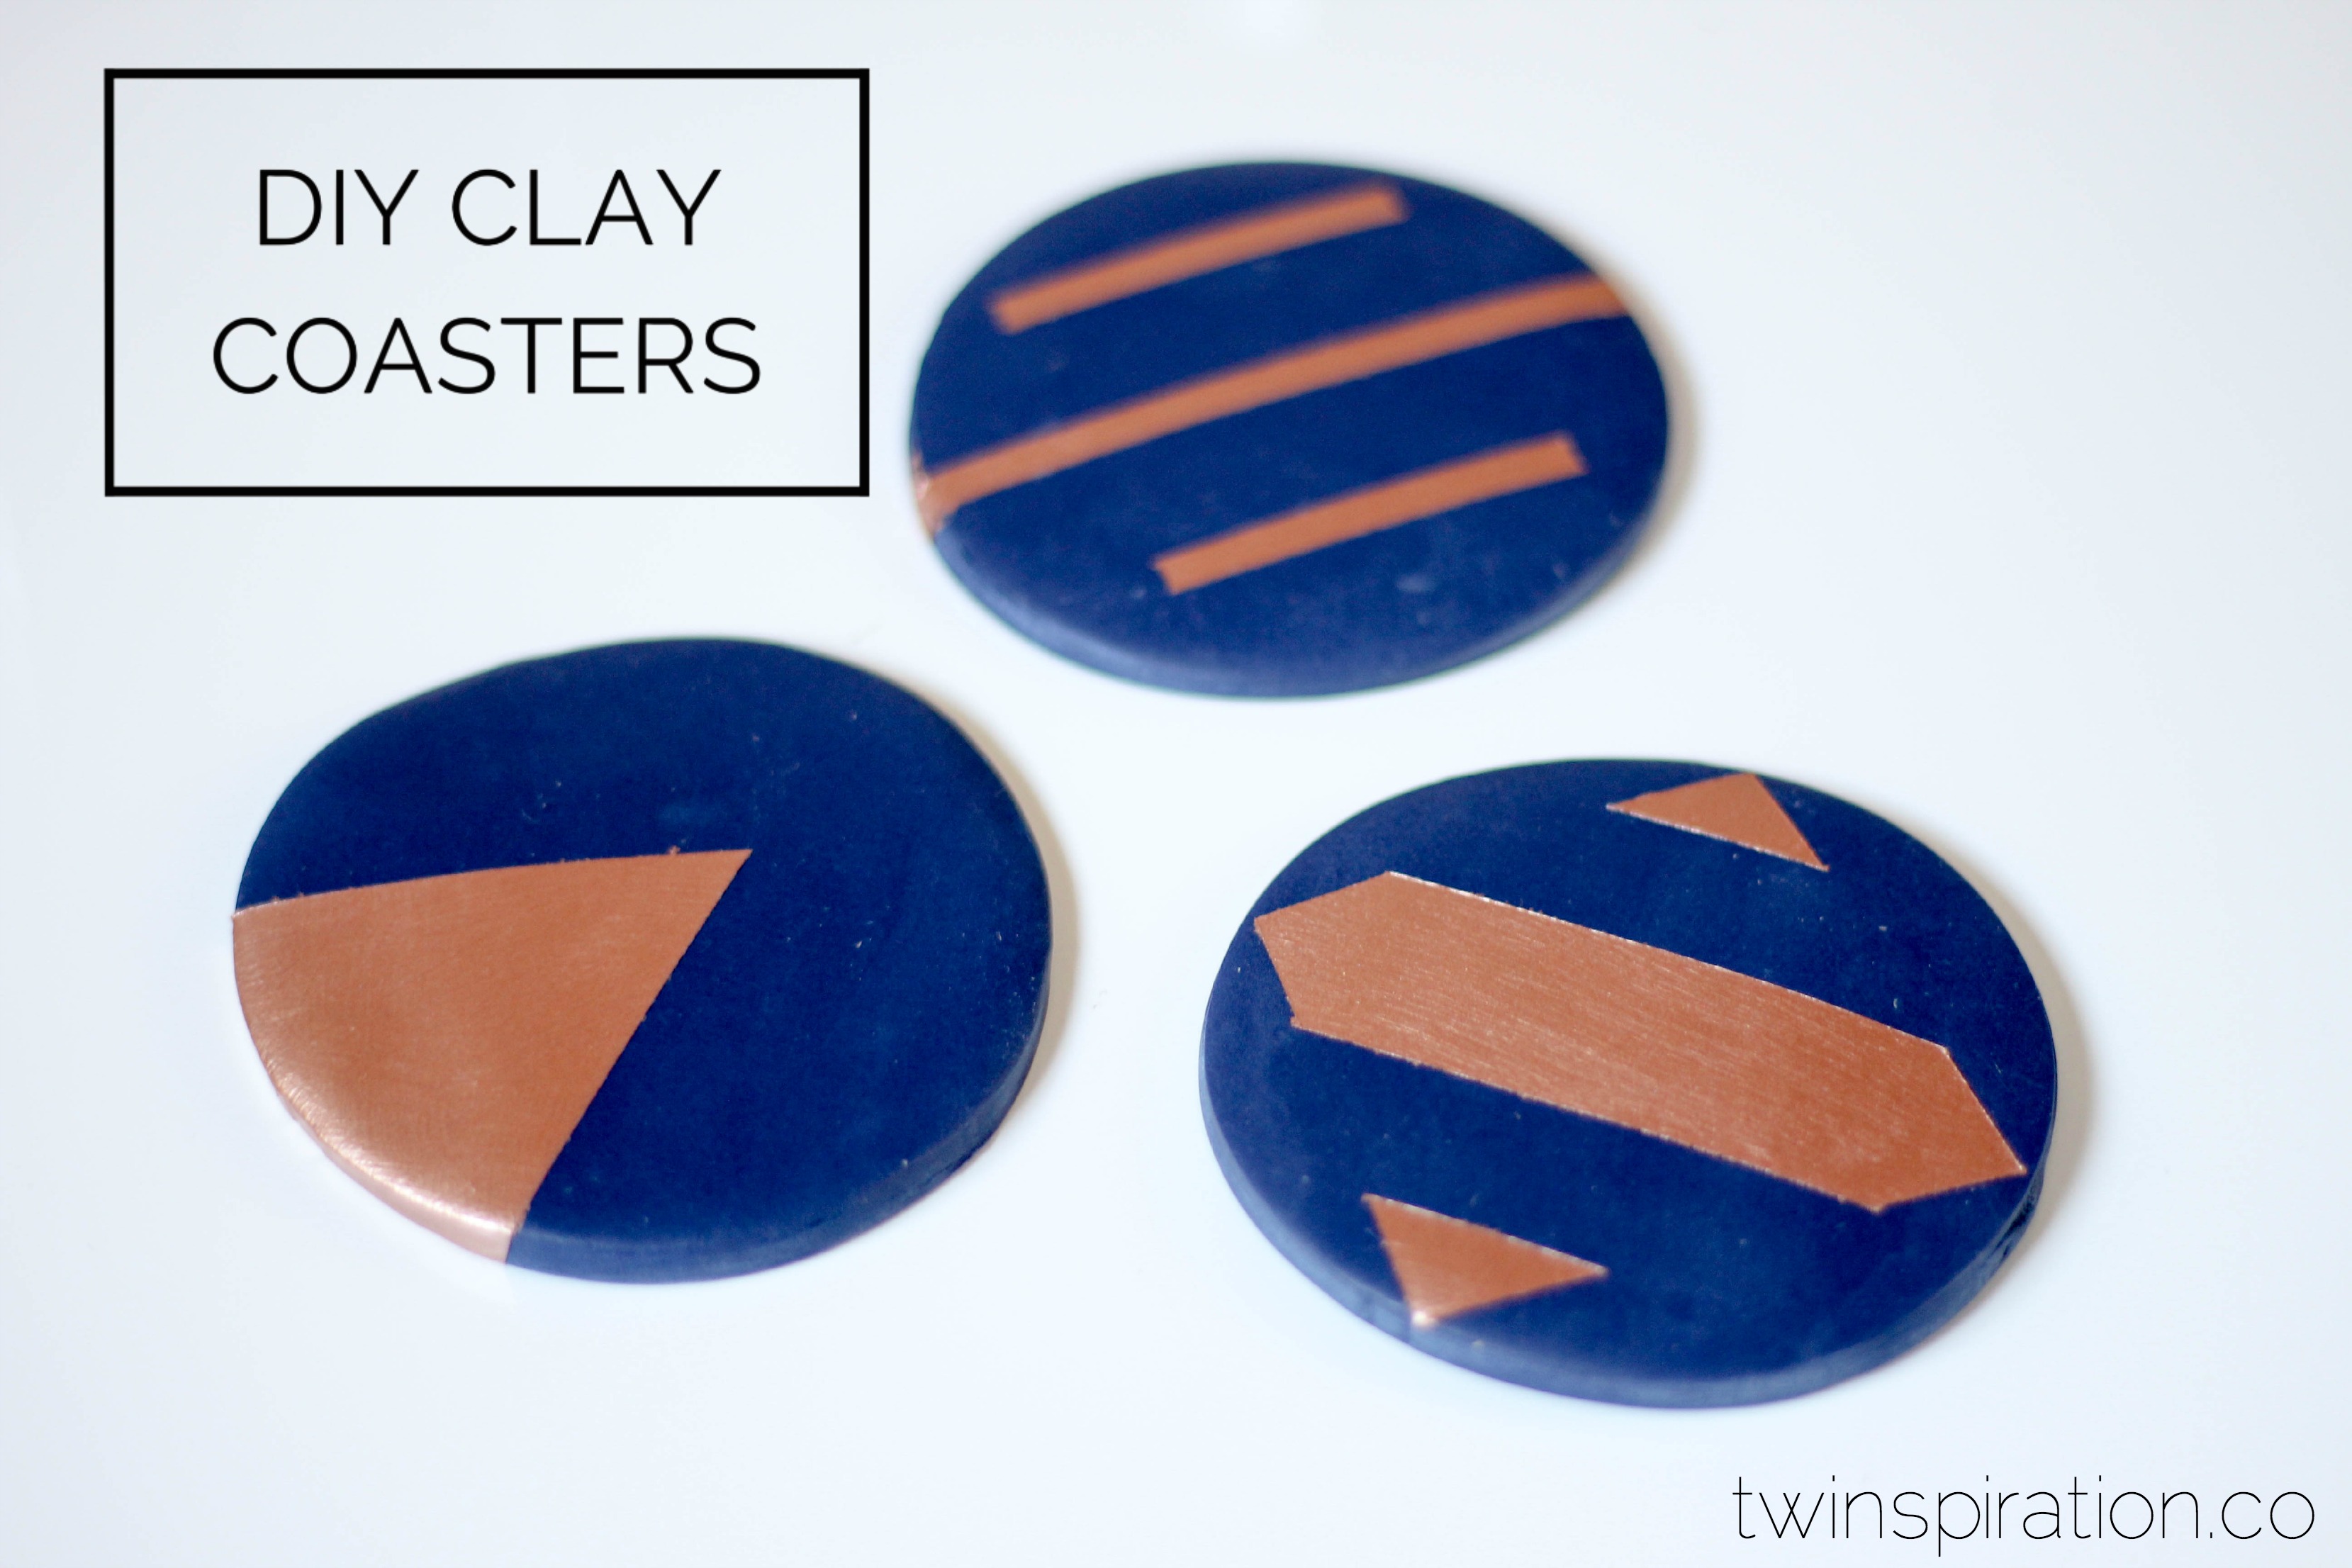 DIY Clay Coasters by Twinspiration at https://twinspiration.co/diy-clay-coasters/